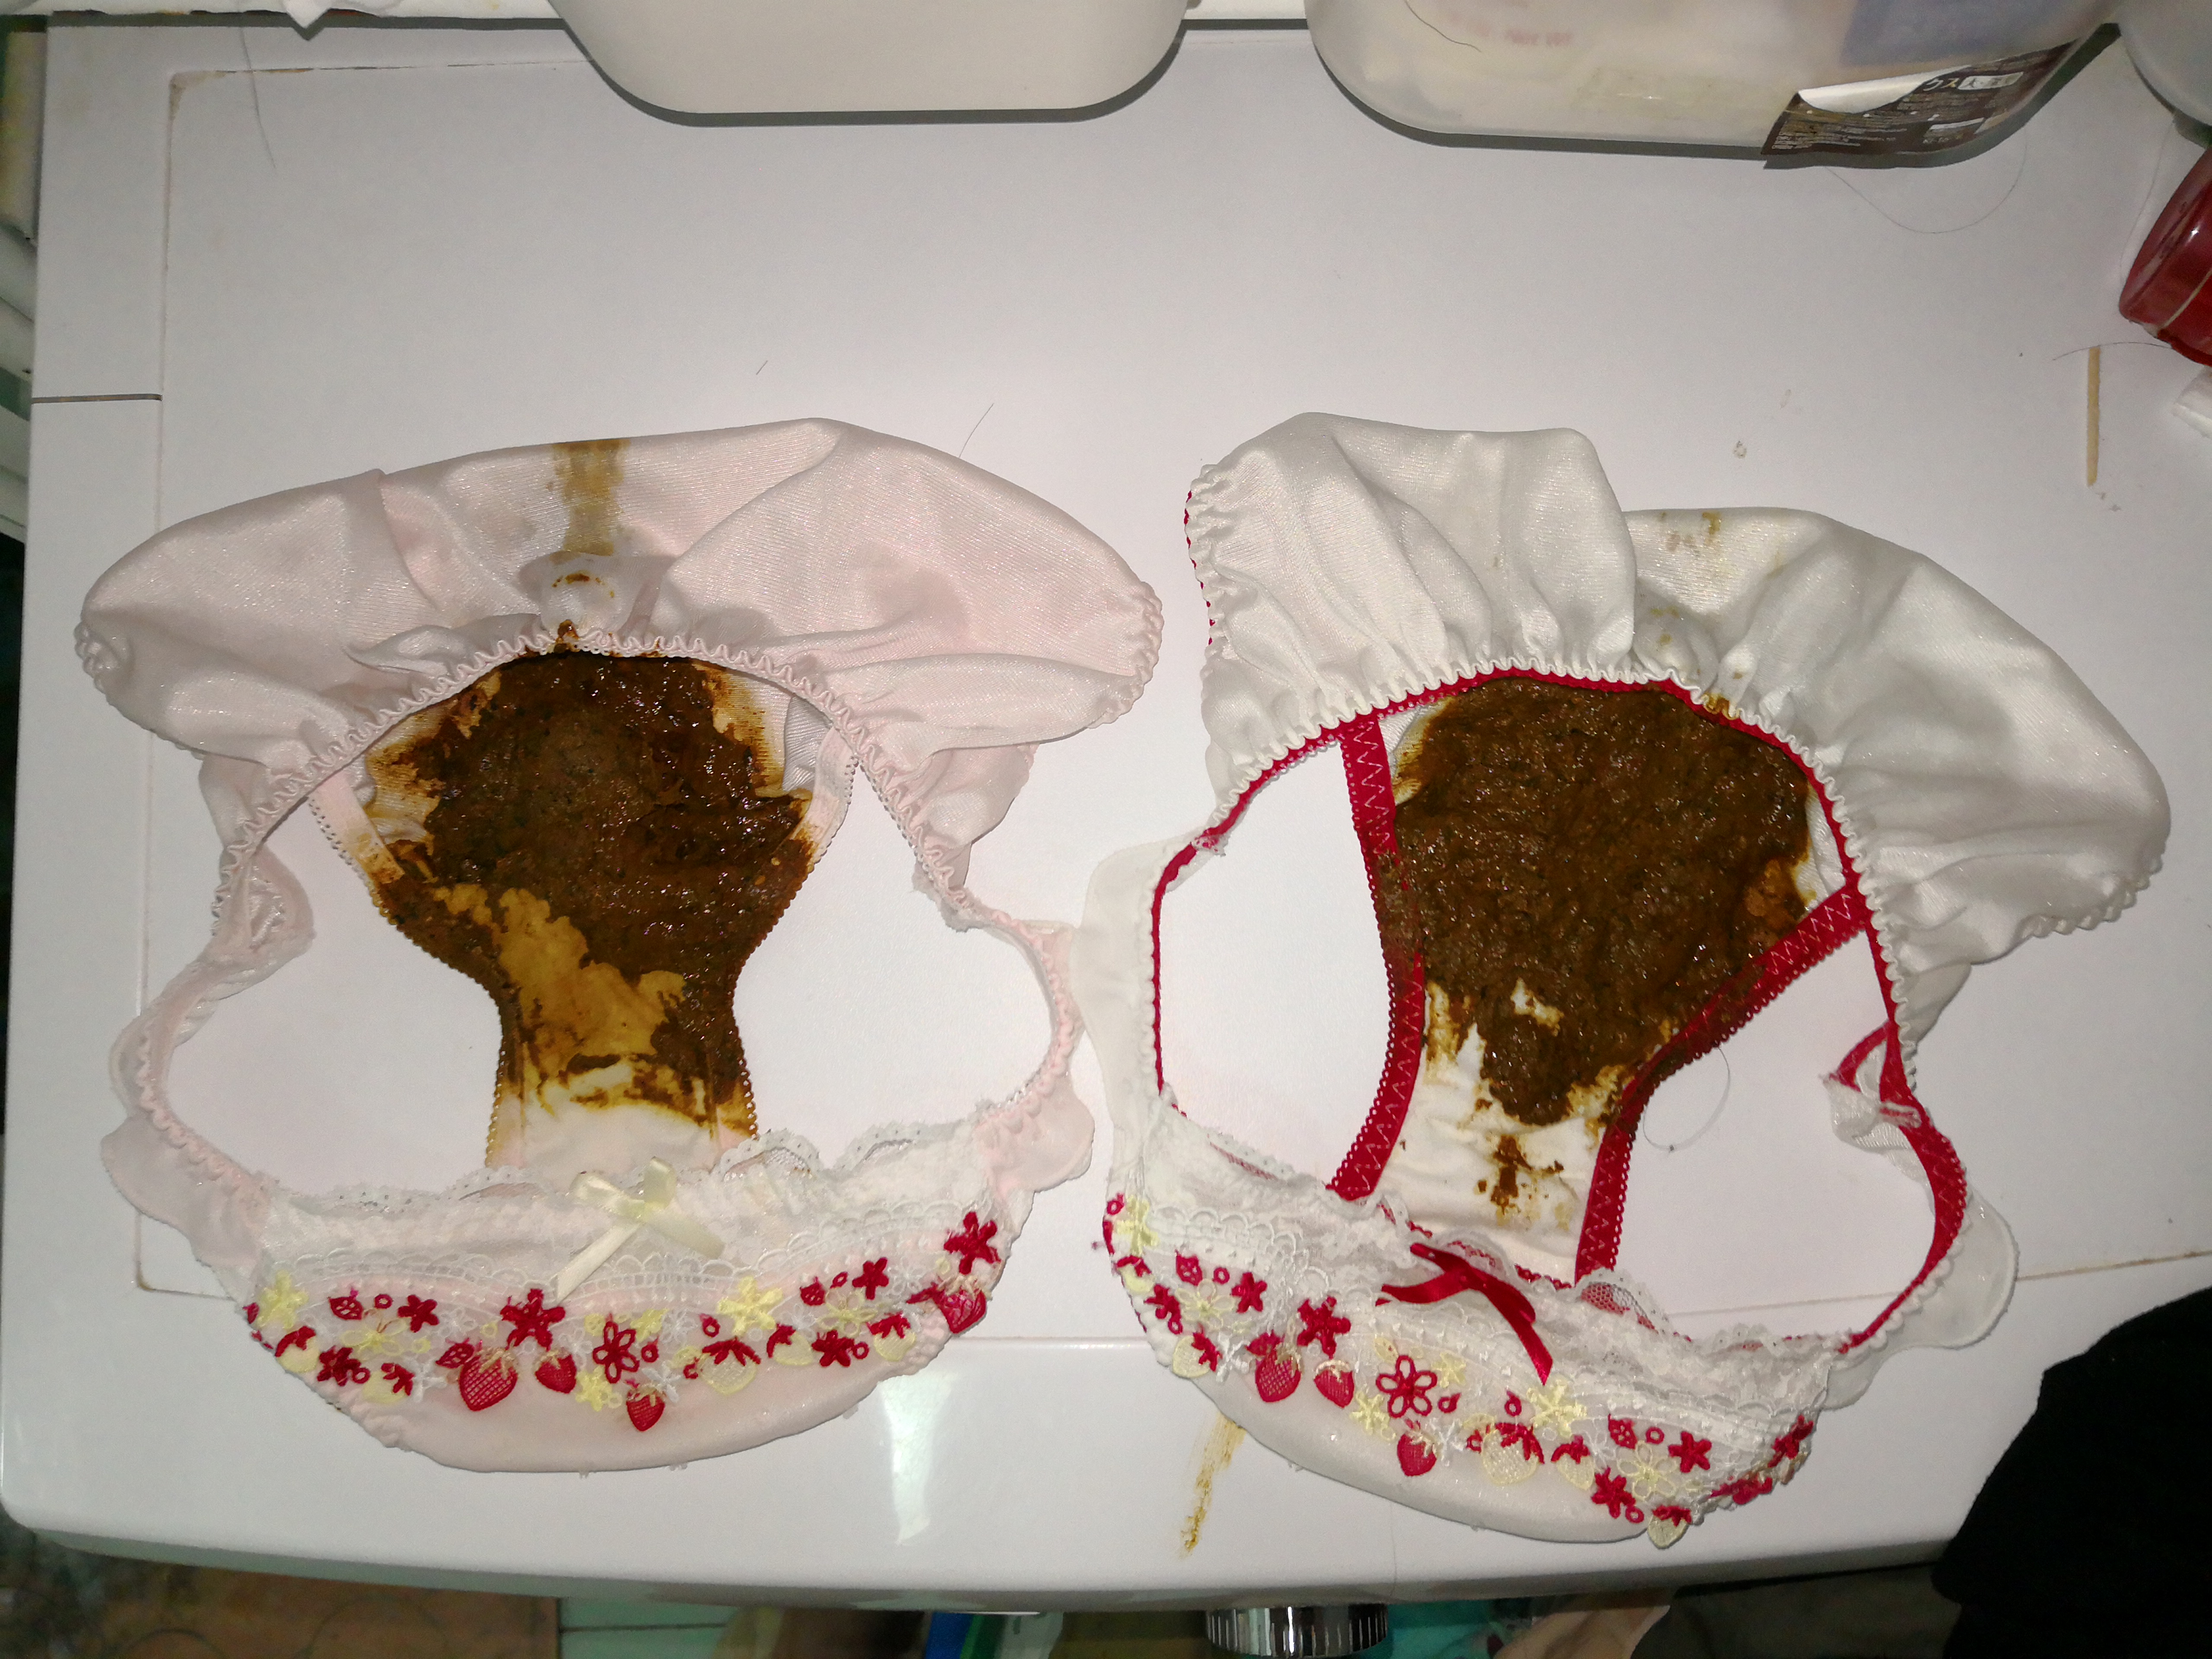 Take a look of that two lovely shited cherry panties!2